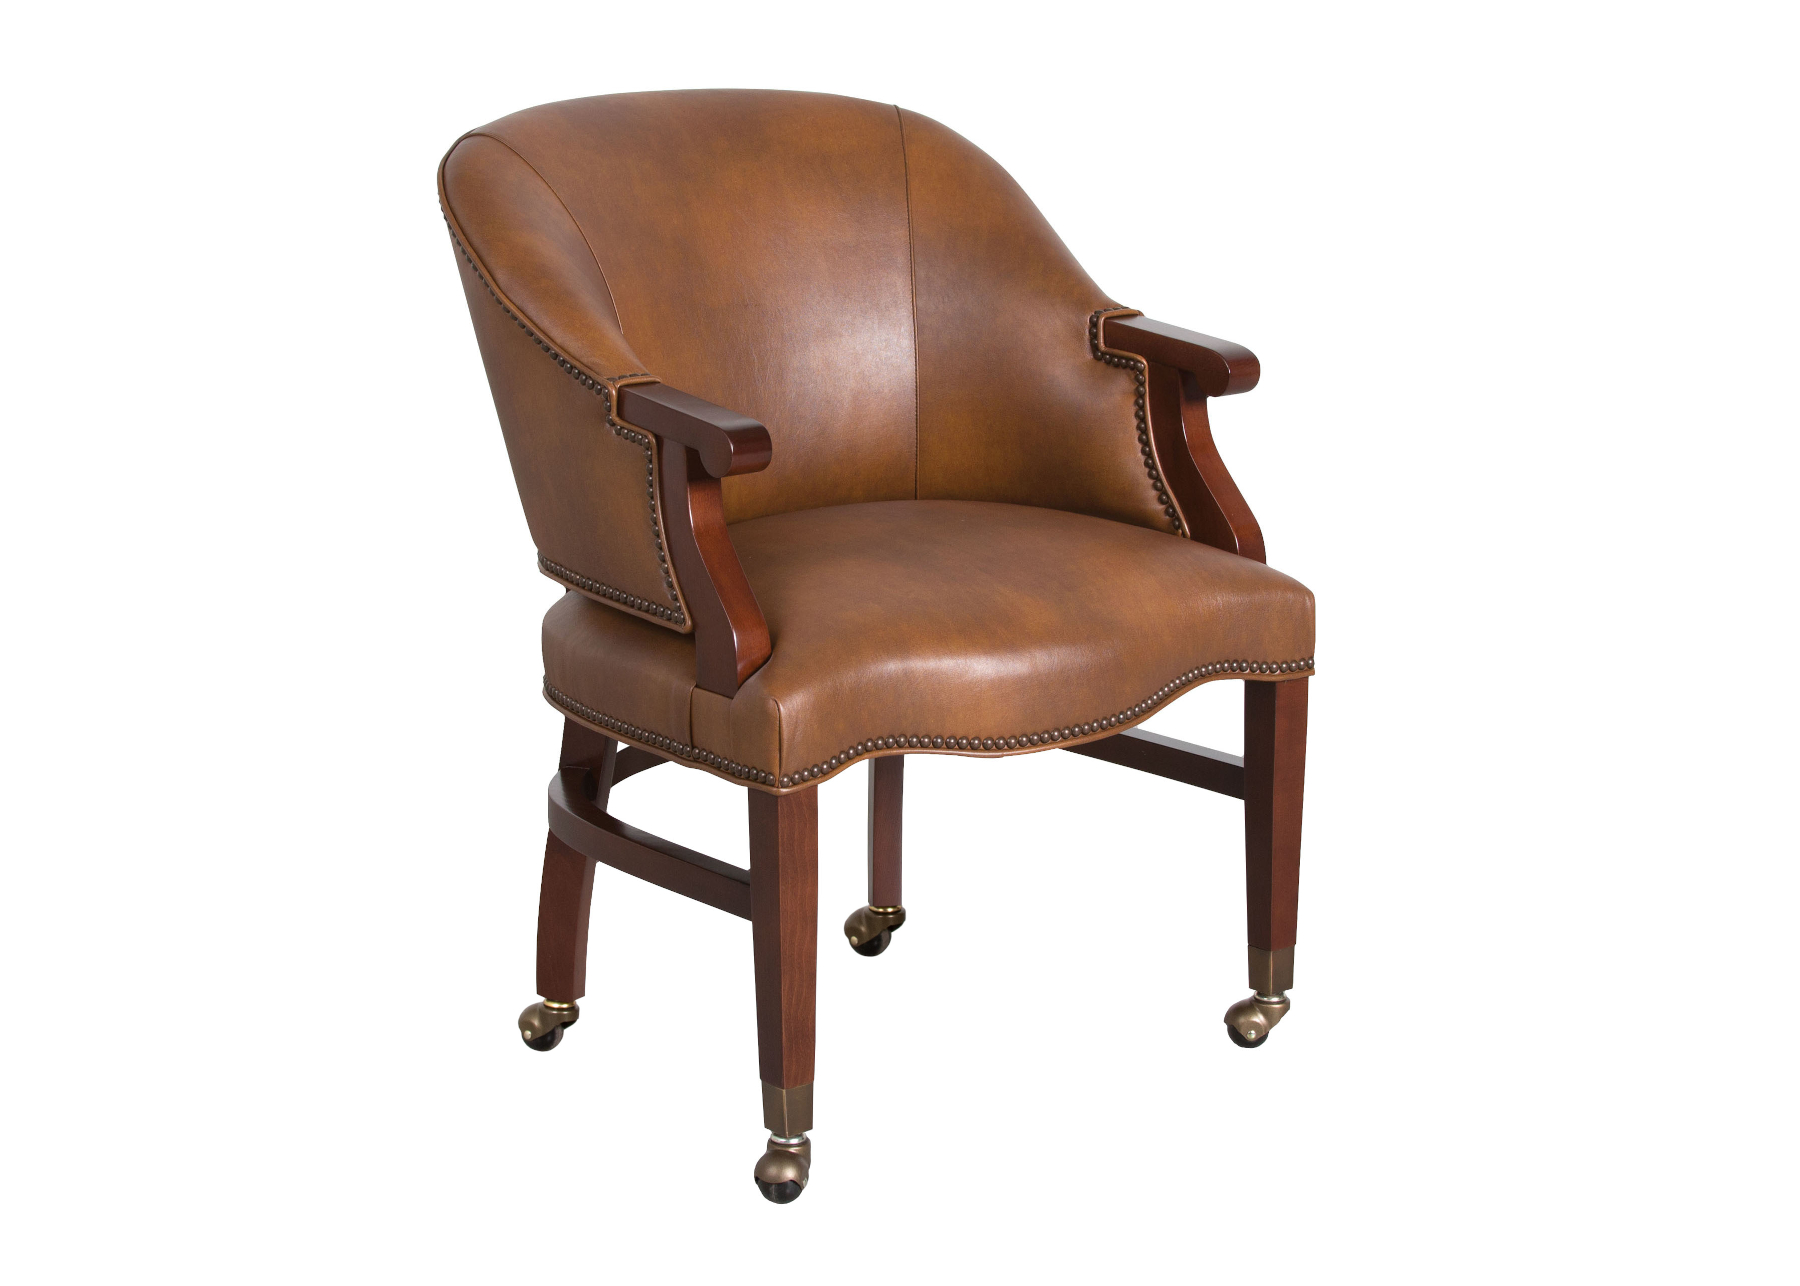  ELTON CHAIR WOODEN ARMS/CASTER